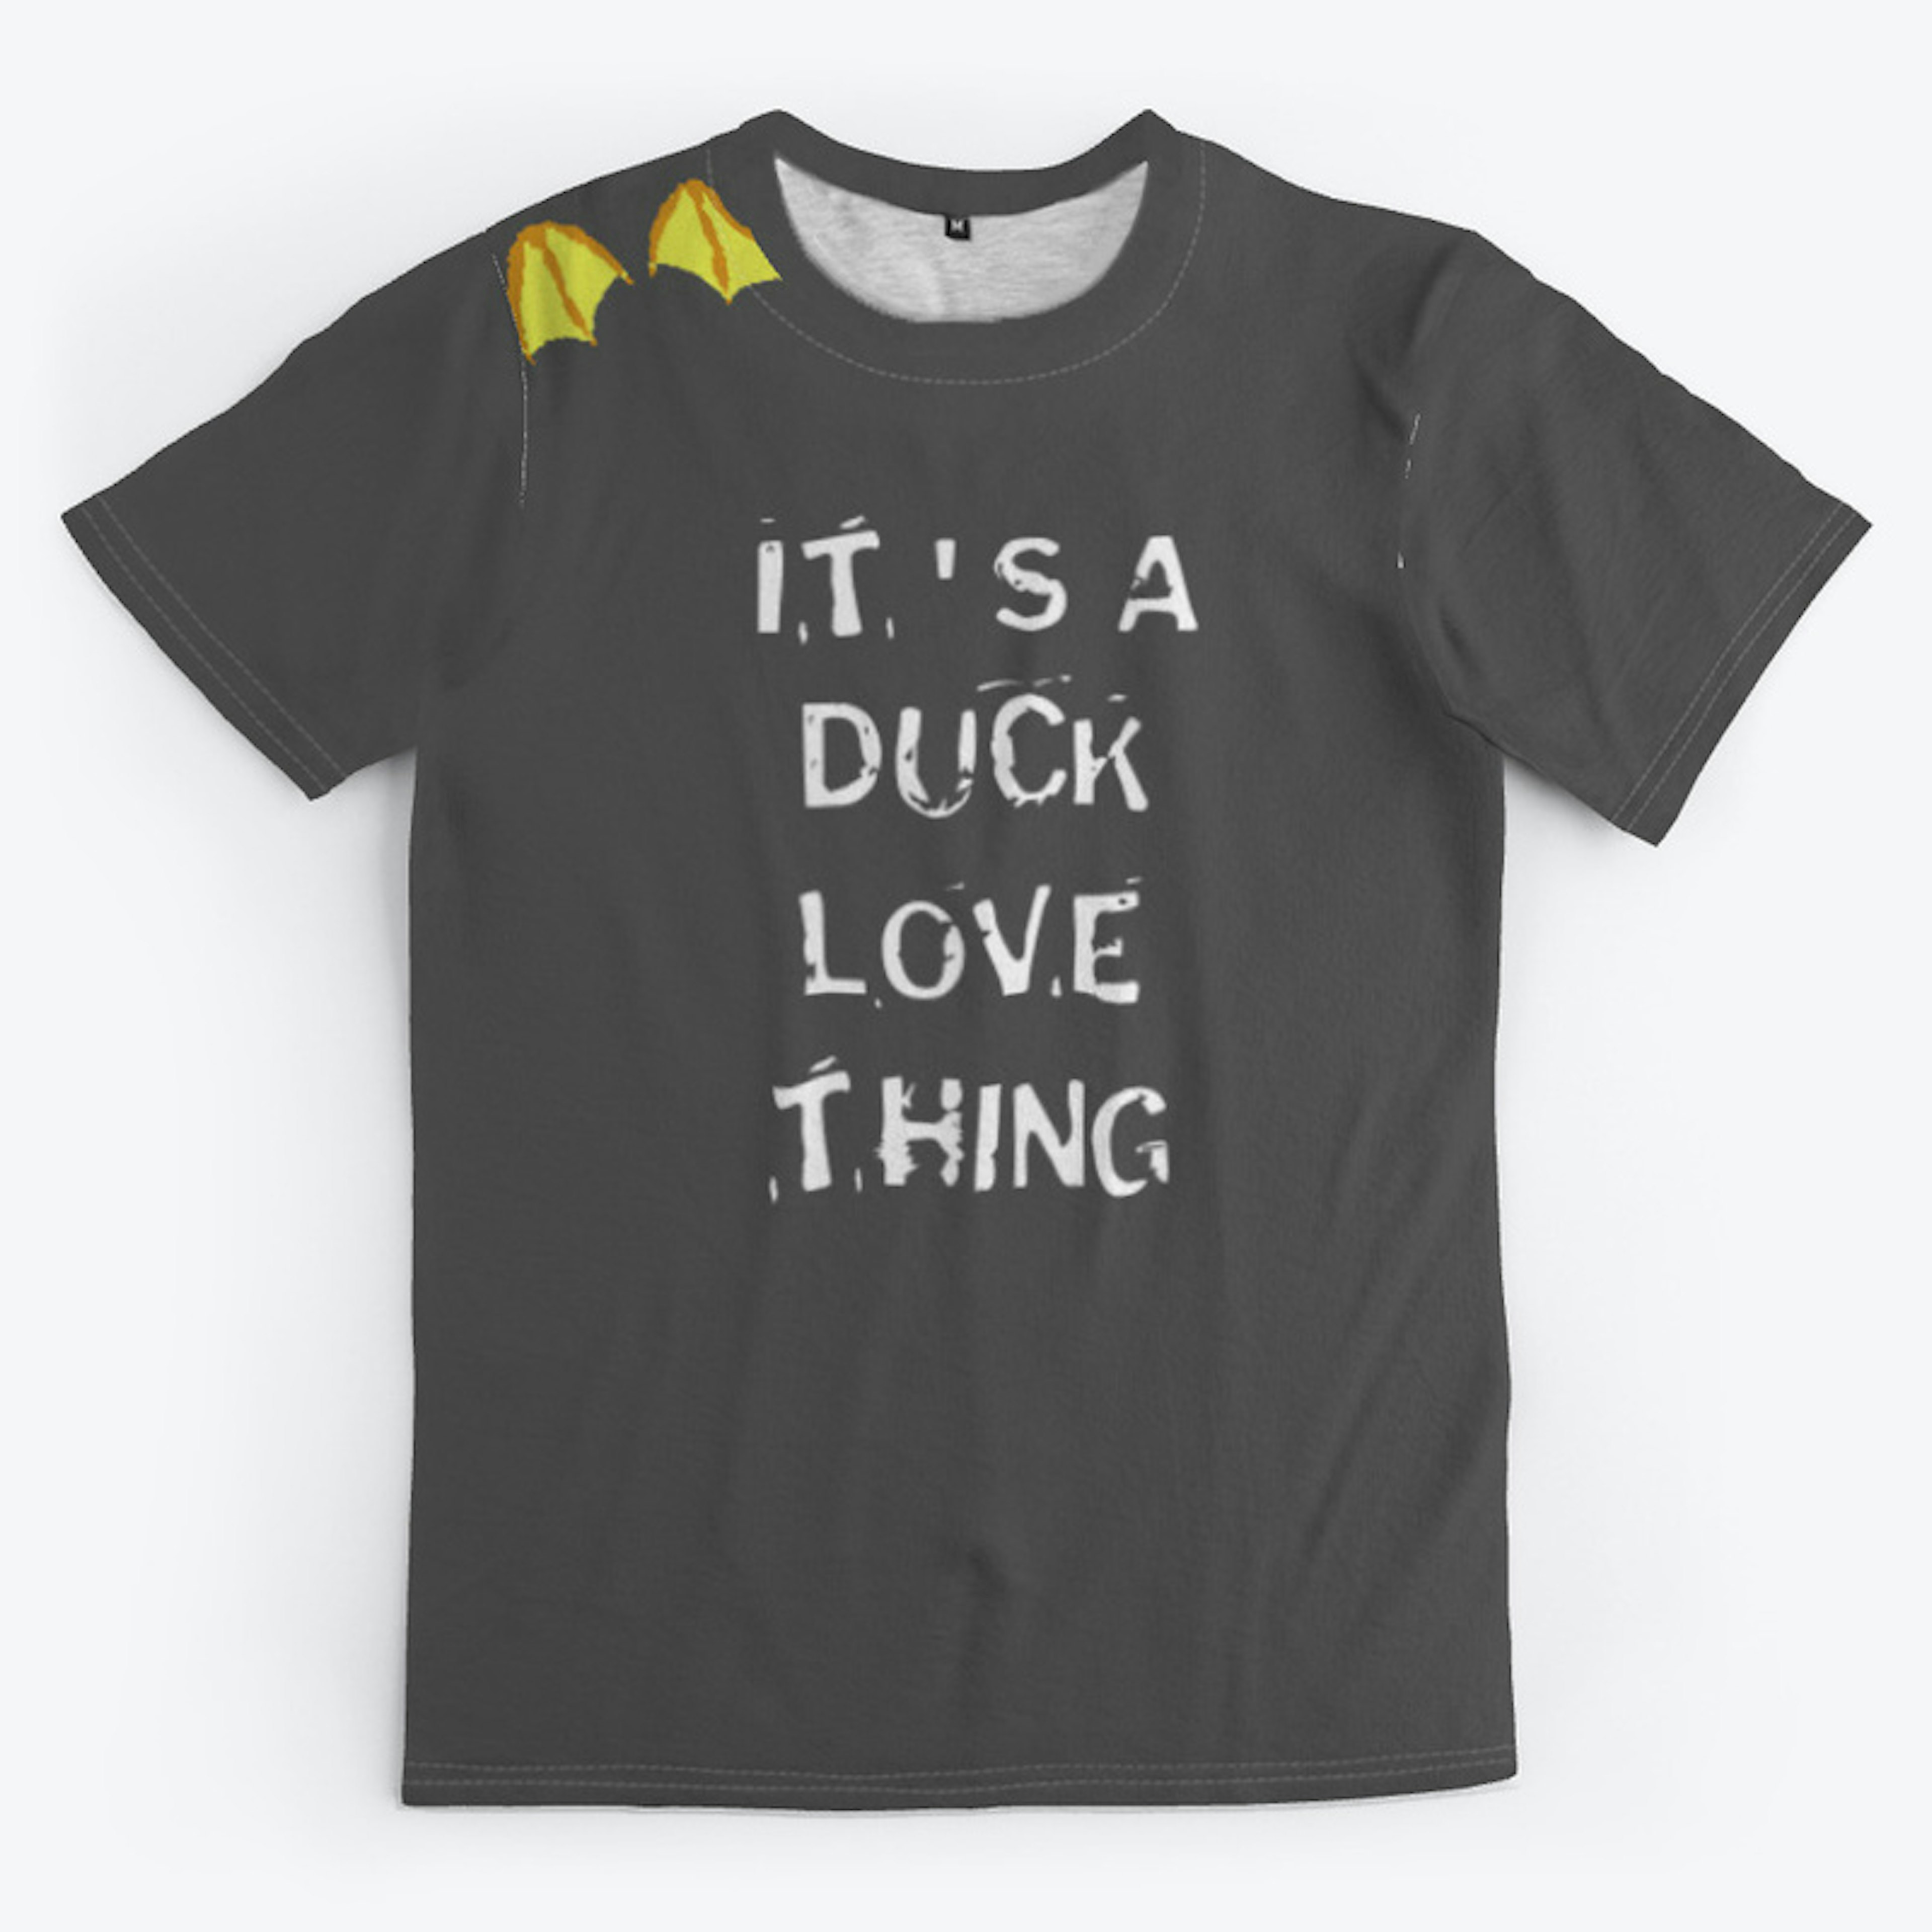 It is a duck love thing